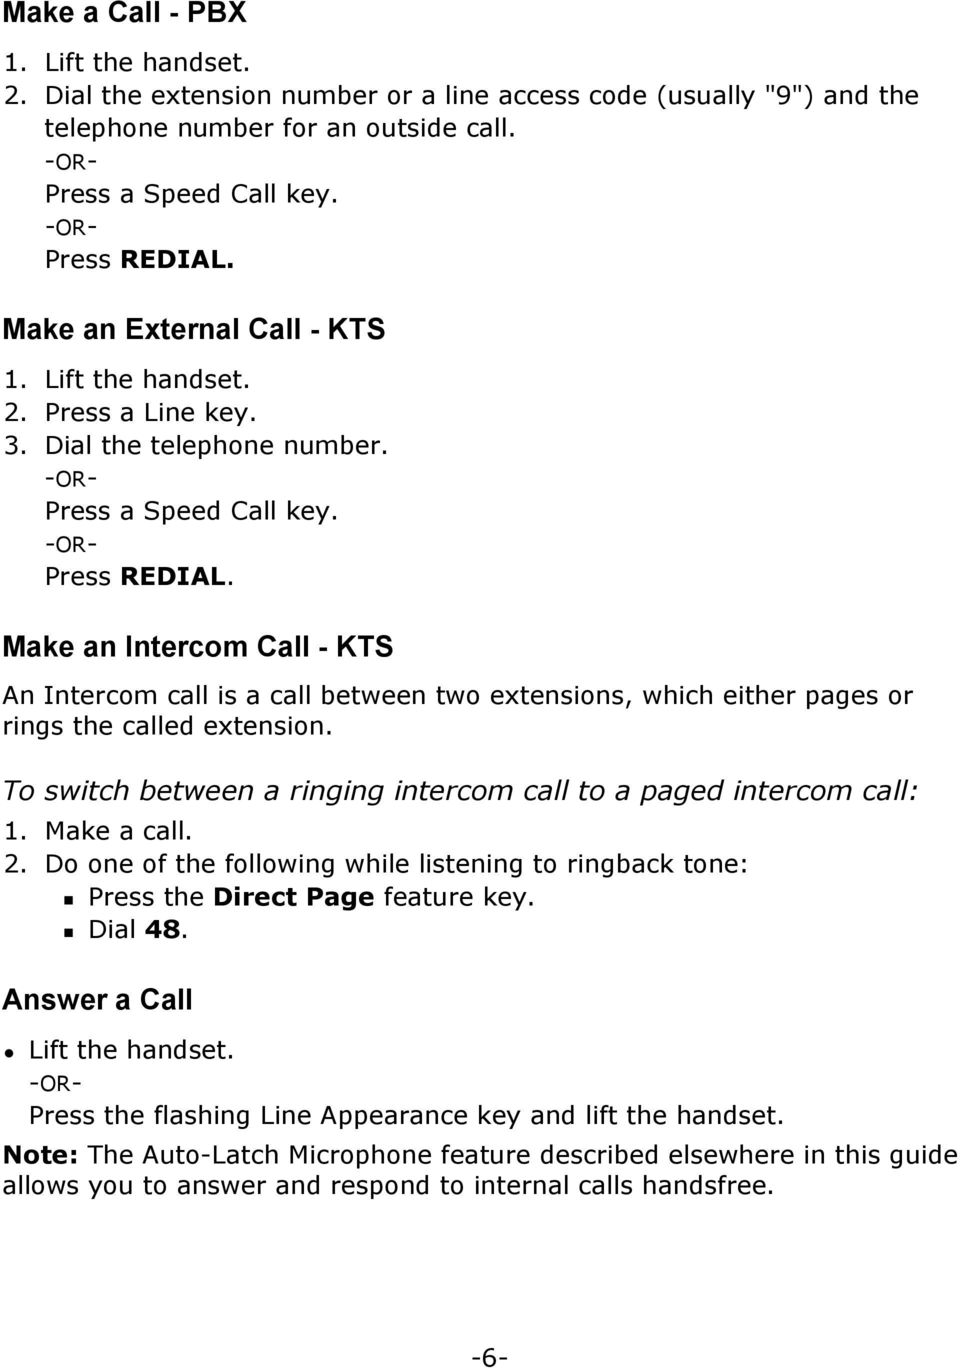 Make an Intercom Call - KTS An Intercom call is a call between two extensions, which either pages or rings the called extension. To switch between a ringing intercom call to a paged intercom call: 1.